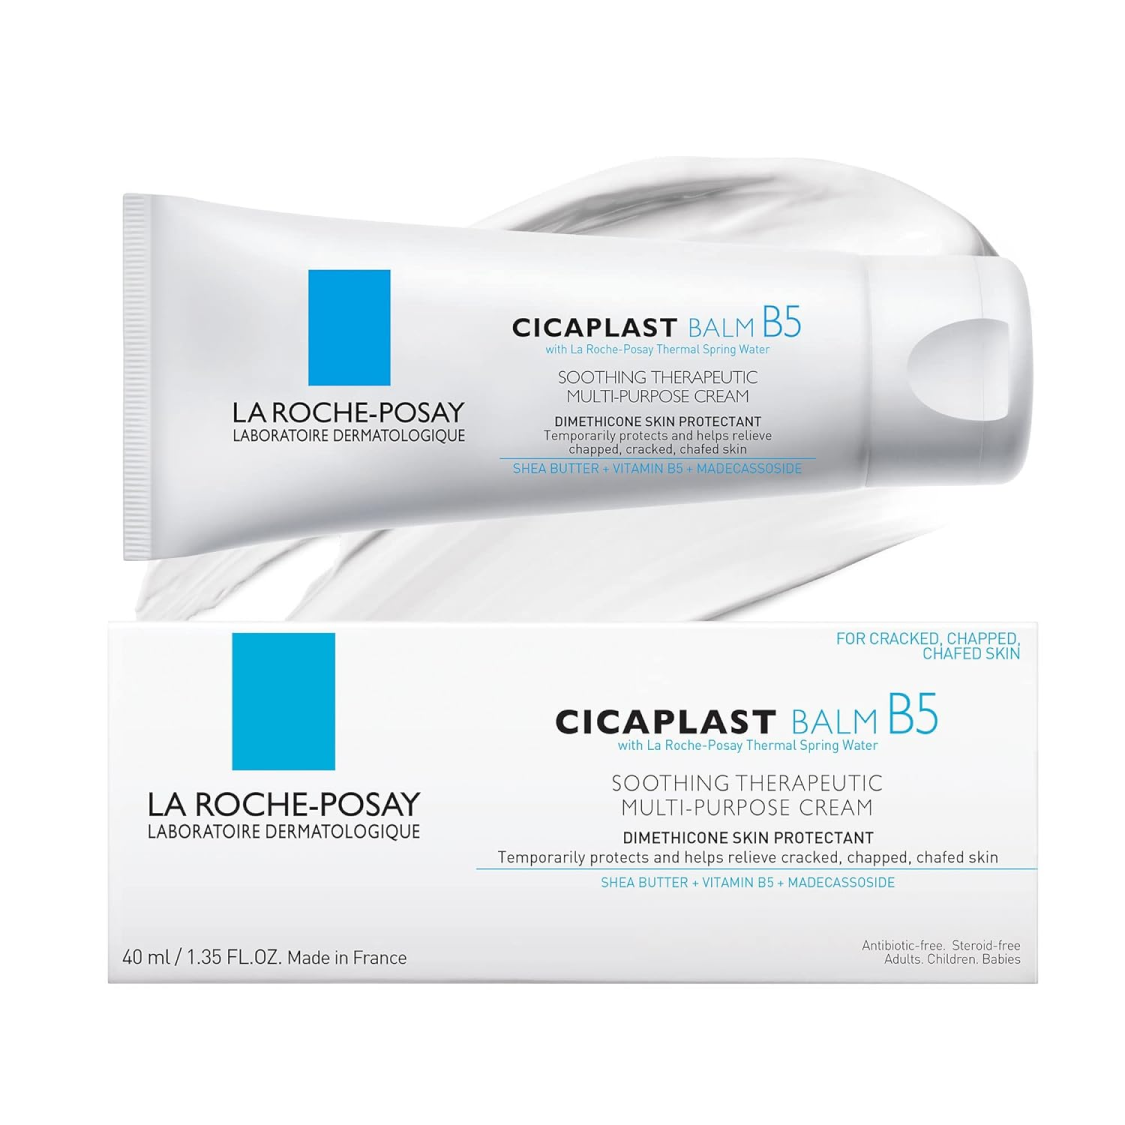 La Roche-Posay Cicaplast Balm B5, Healing Ointment and Soothing Therapeutic Multi Purpose Cream